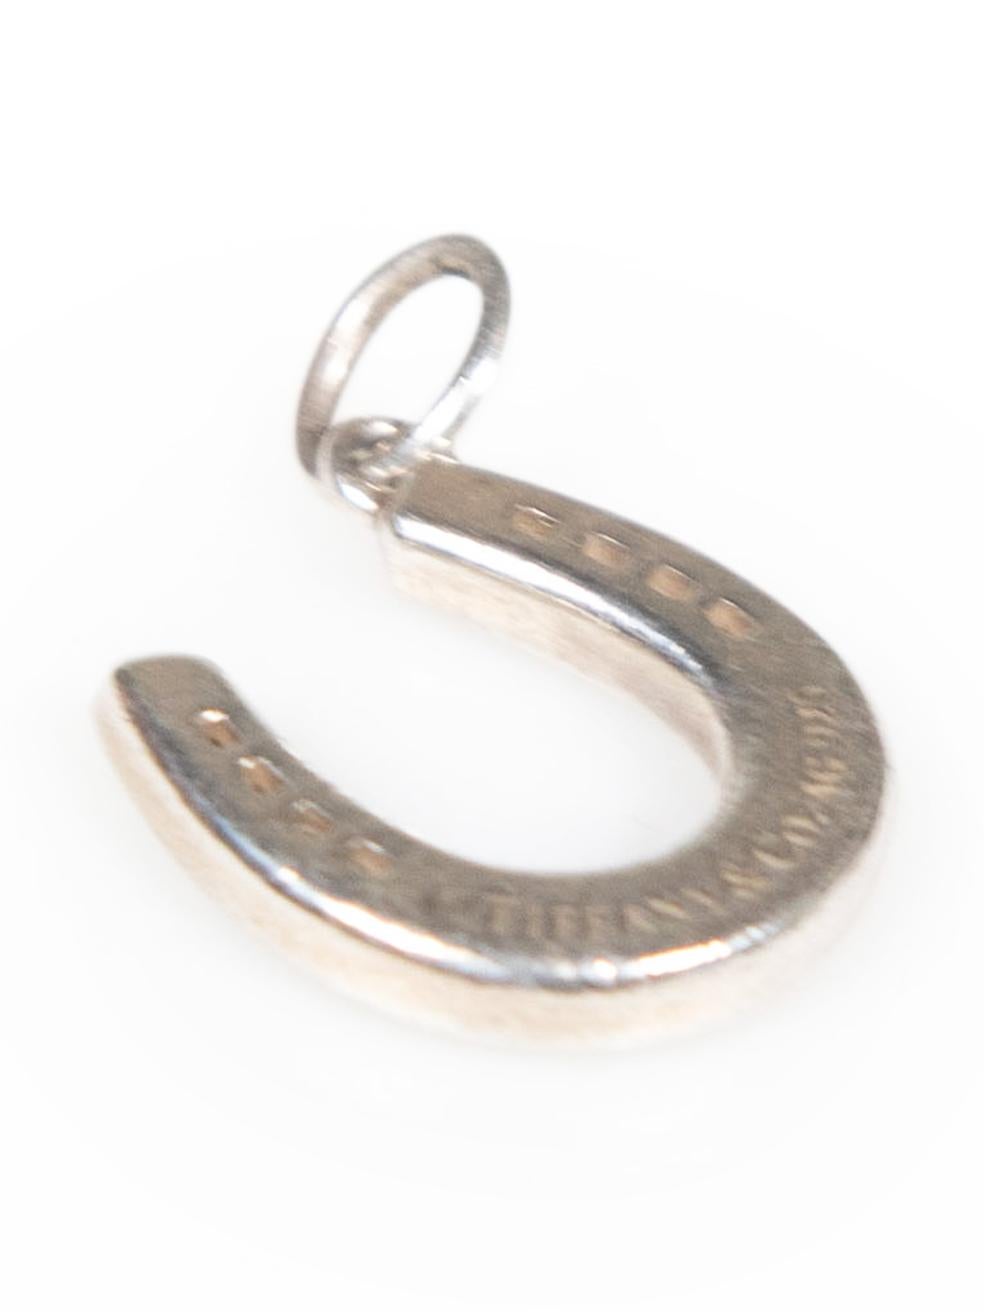 CONDITION is Good. General wear to charm is evident. Moderate signs of wear to both sides with scratches to the surface on this used Tiffany & Co. designer resale item.
 
Details
Silver
925 Sterling silver
Horseshoe charm
Embossed logo
